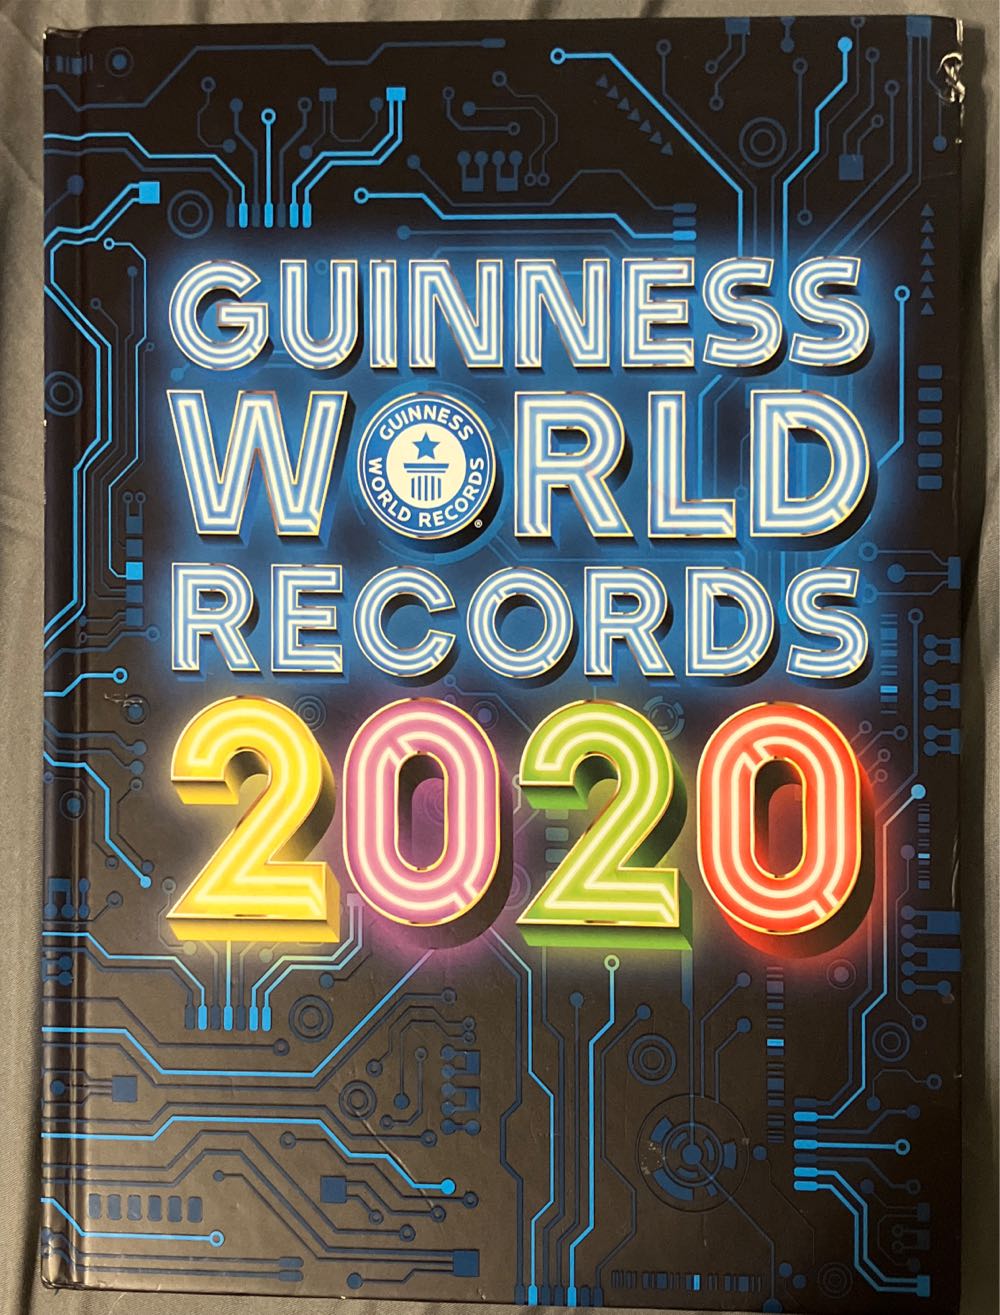 2020 Guinness World Records - Guiness Word Records (Guinness World Records) book collectible [Barcode 9781912286836] - Main Image 2